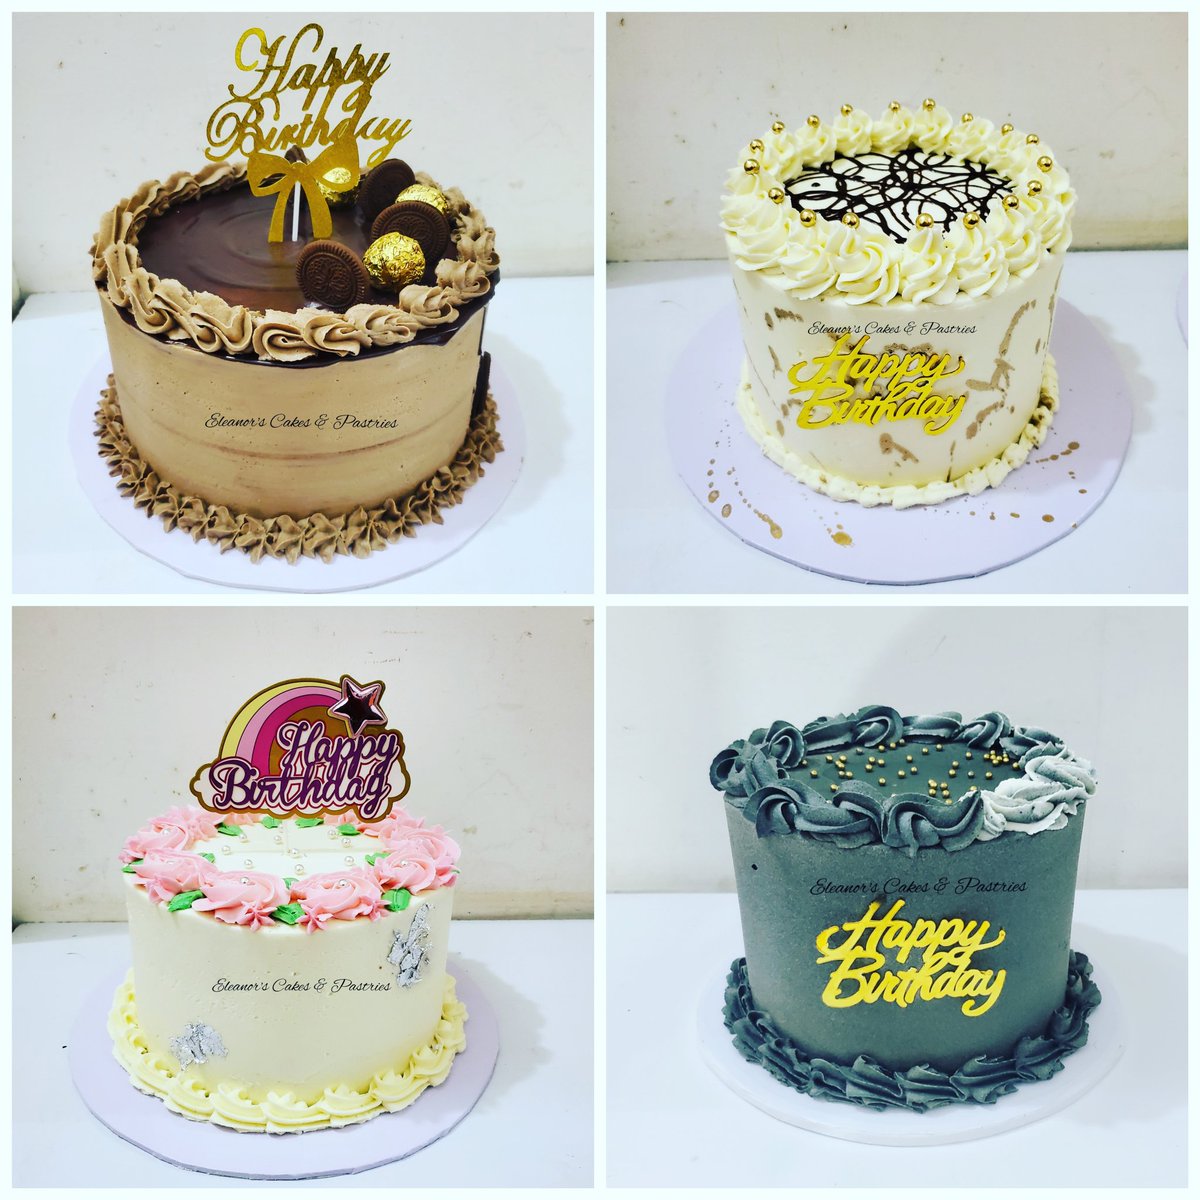 Ready to go cakes Available everyday  every week.
With 20.000frs, you have the right to make a choice.
Our shop opens Tuesday to Saturday 7am - 9pm and Sundays 12.30pm -9pm
Thank you for stopping by.
#buttercream #buttercreamcakes #readytogocakes